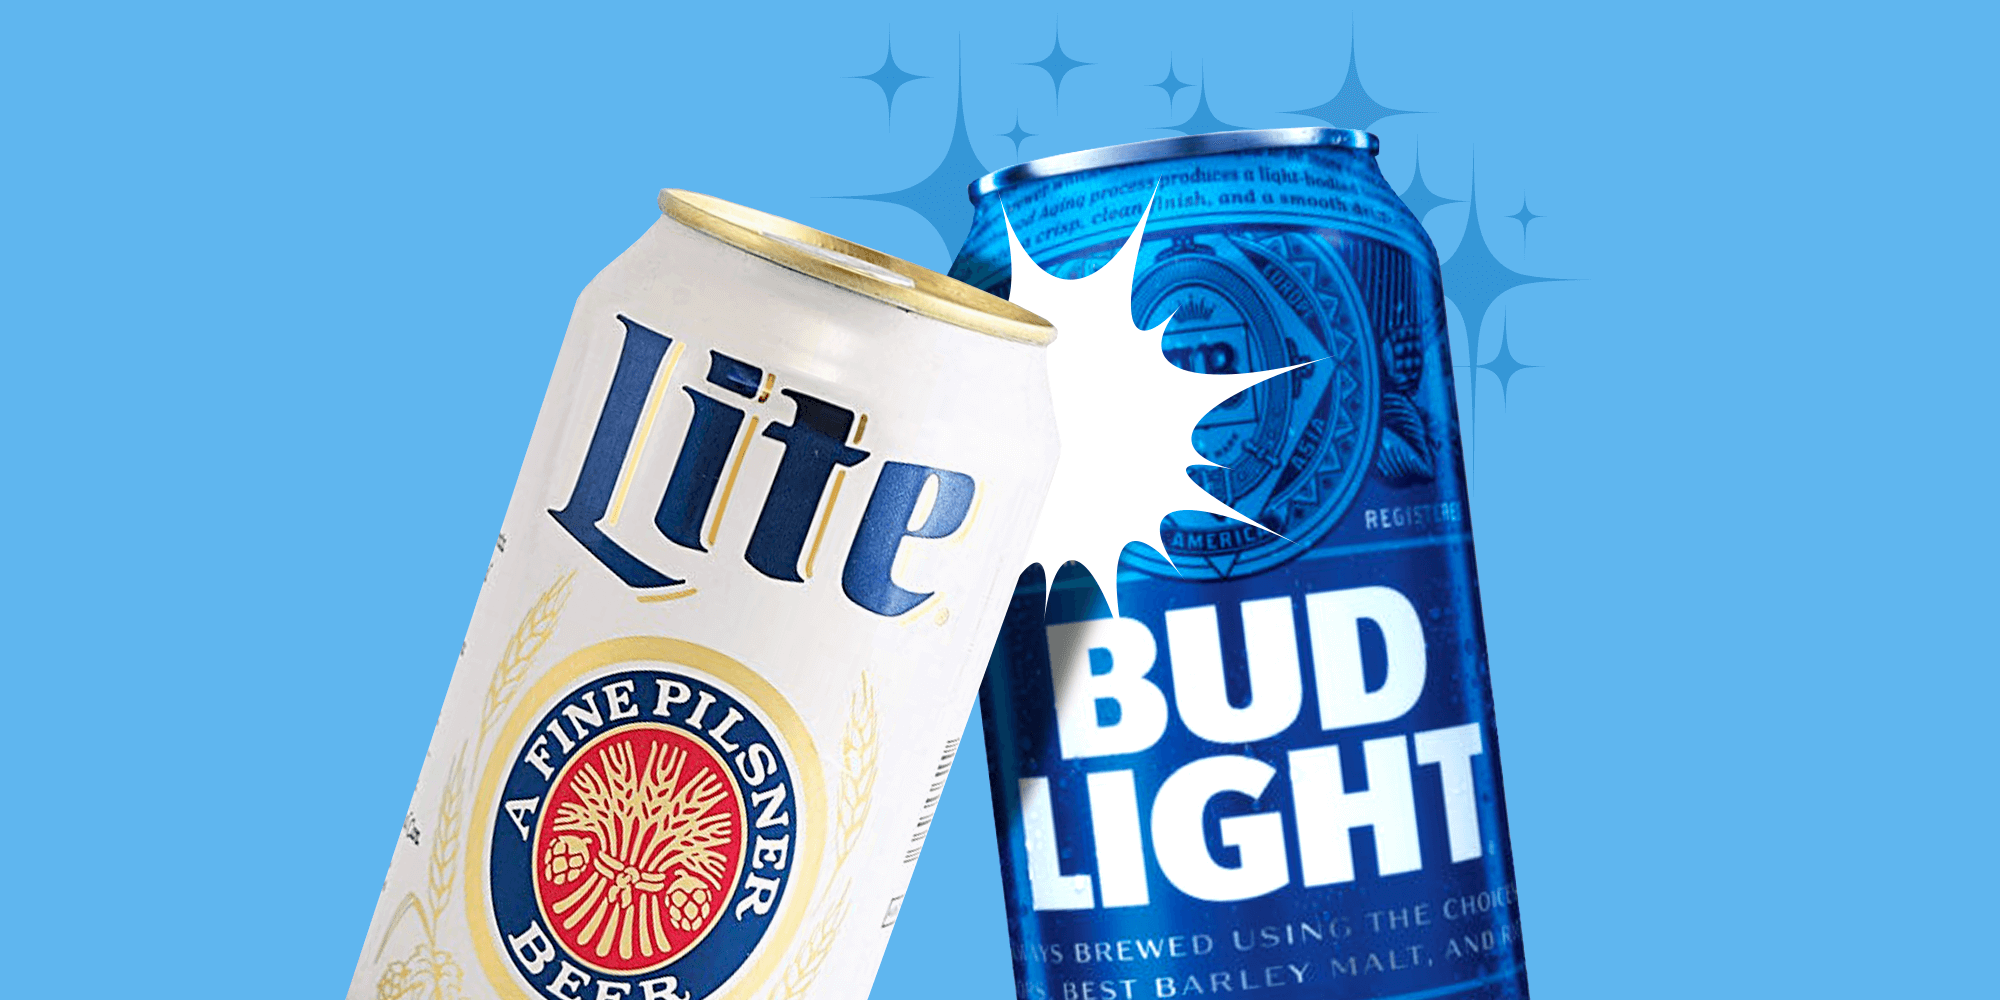 Bud Light may have “just wanted to return some corn syrup to its rightful o...